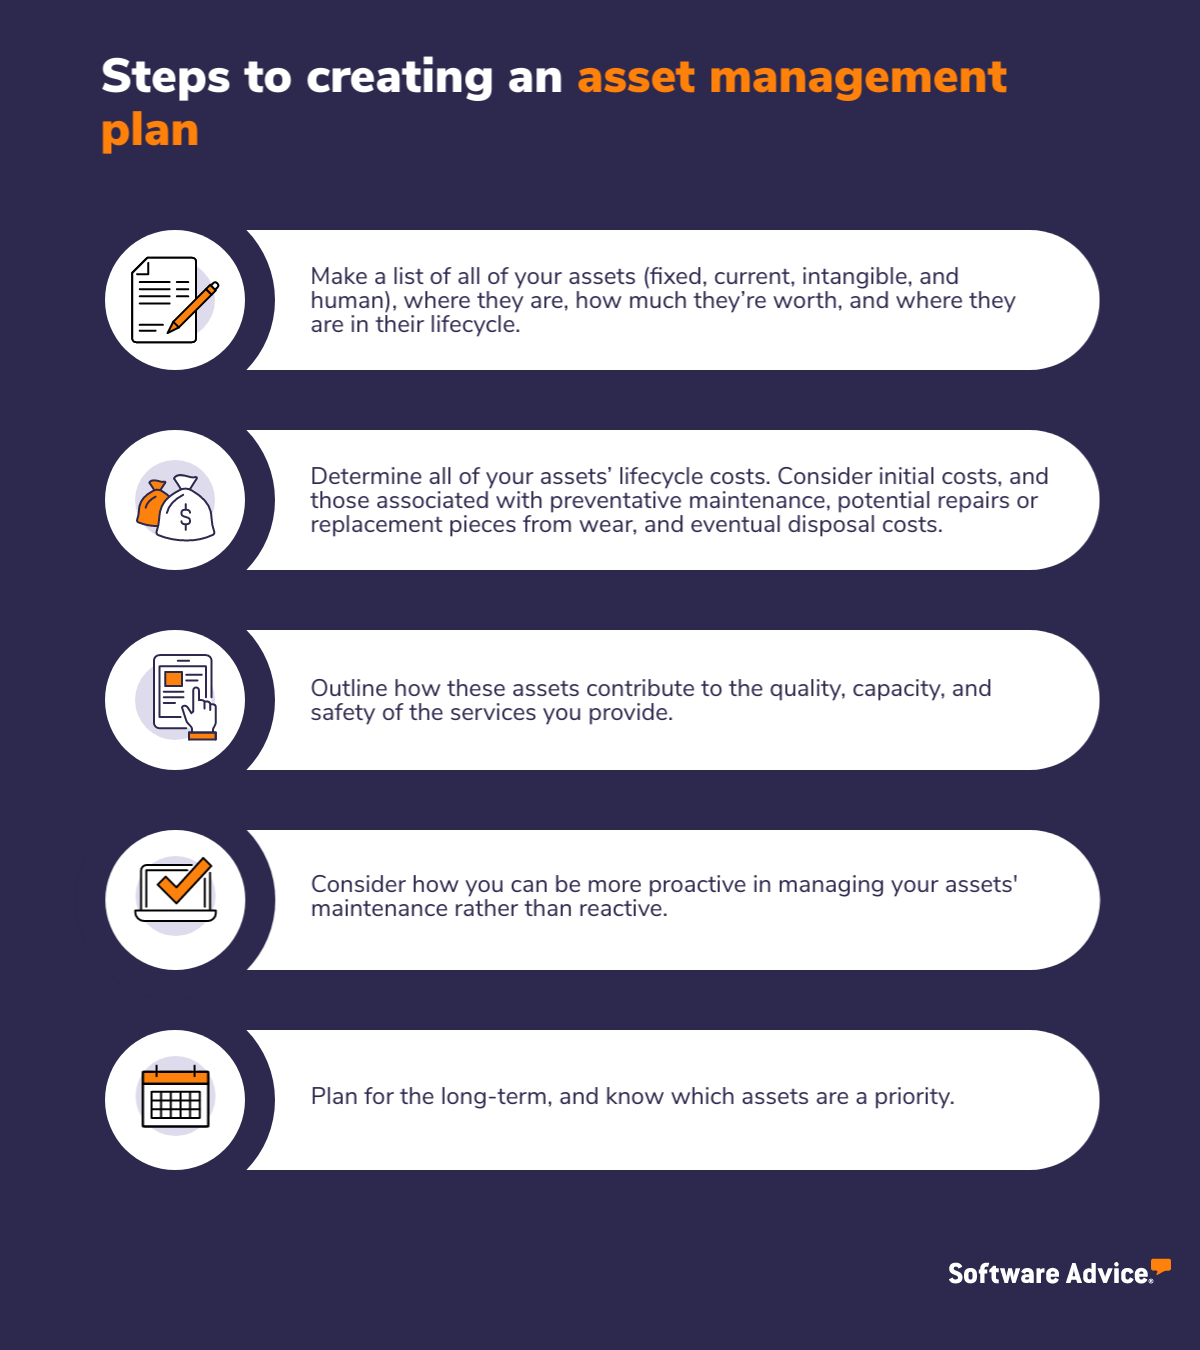 An SA graphic depicting 5 steps to creating an asset management plan